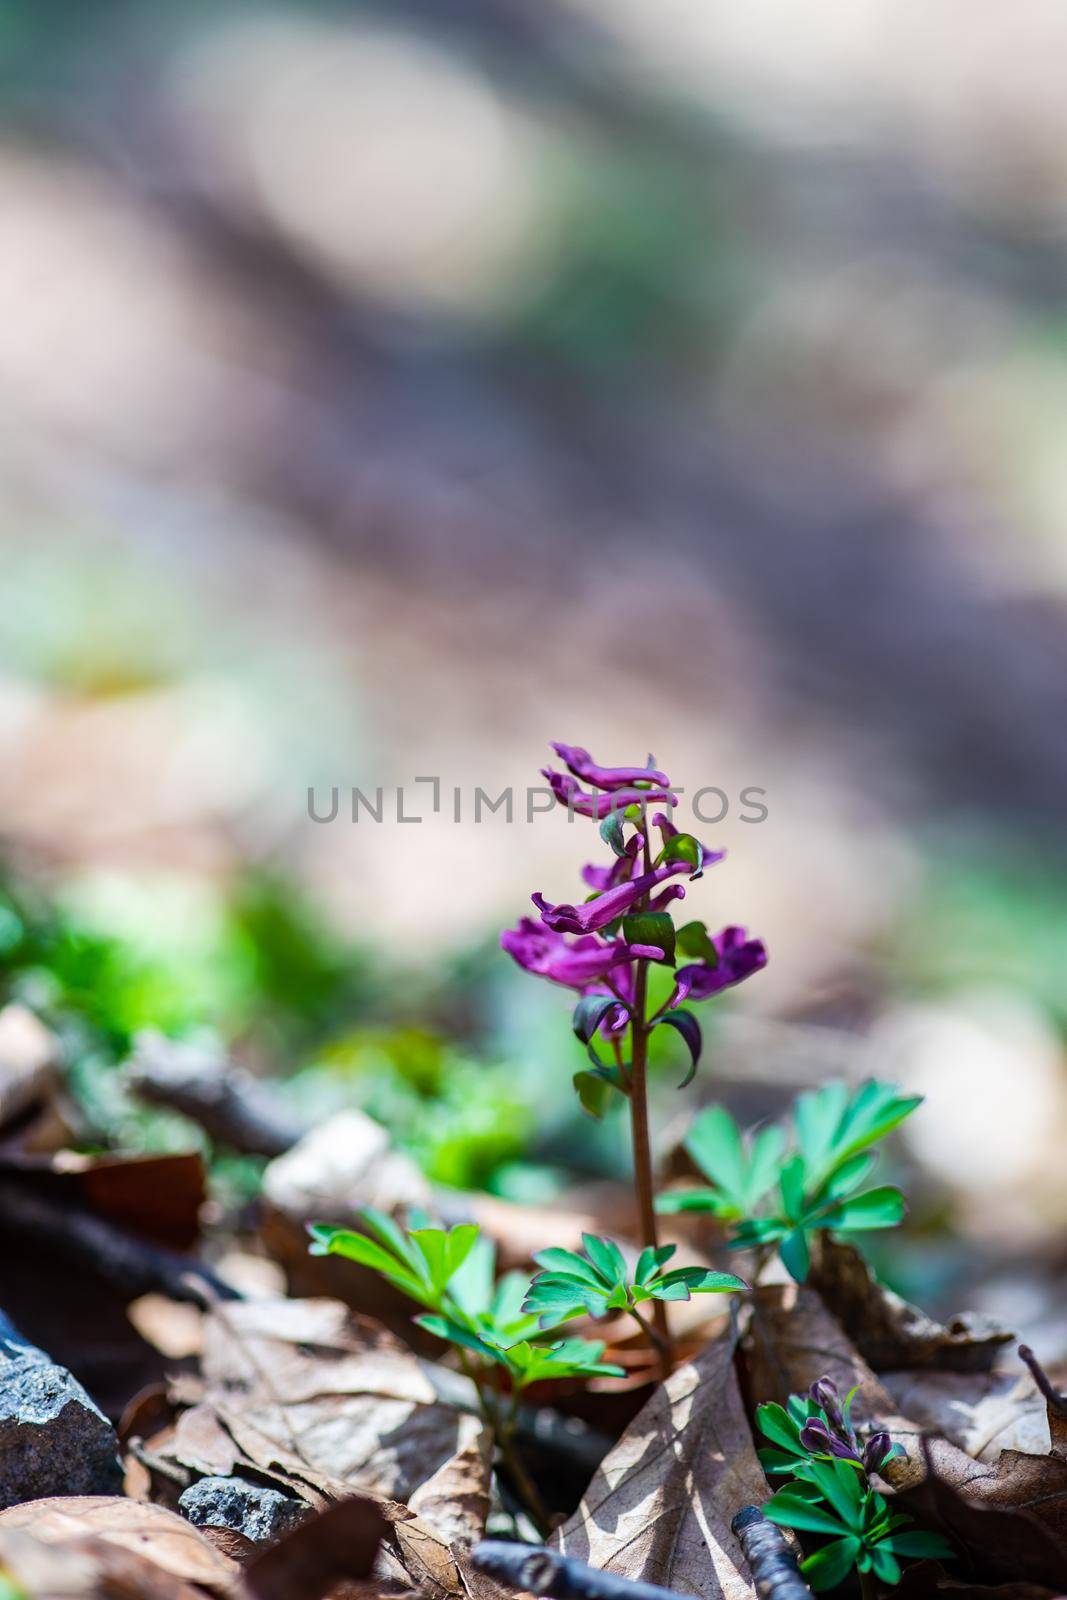 Spring in the forest with close up of Corydalis flowers